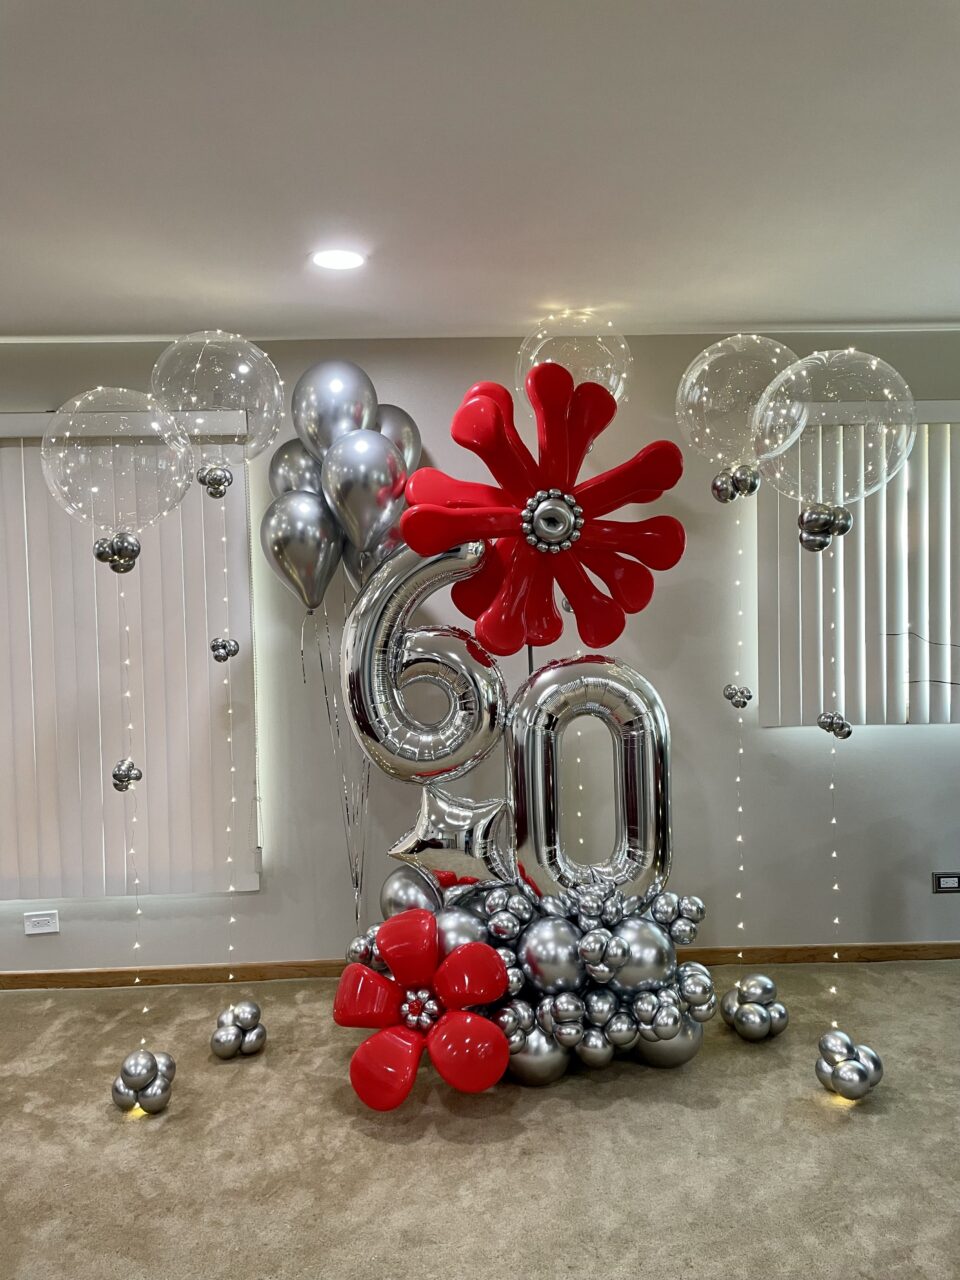 Red and silver balloons